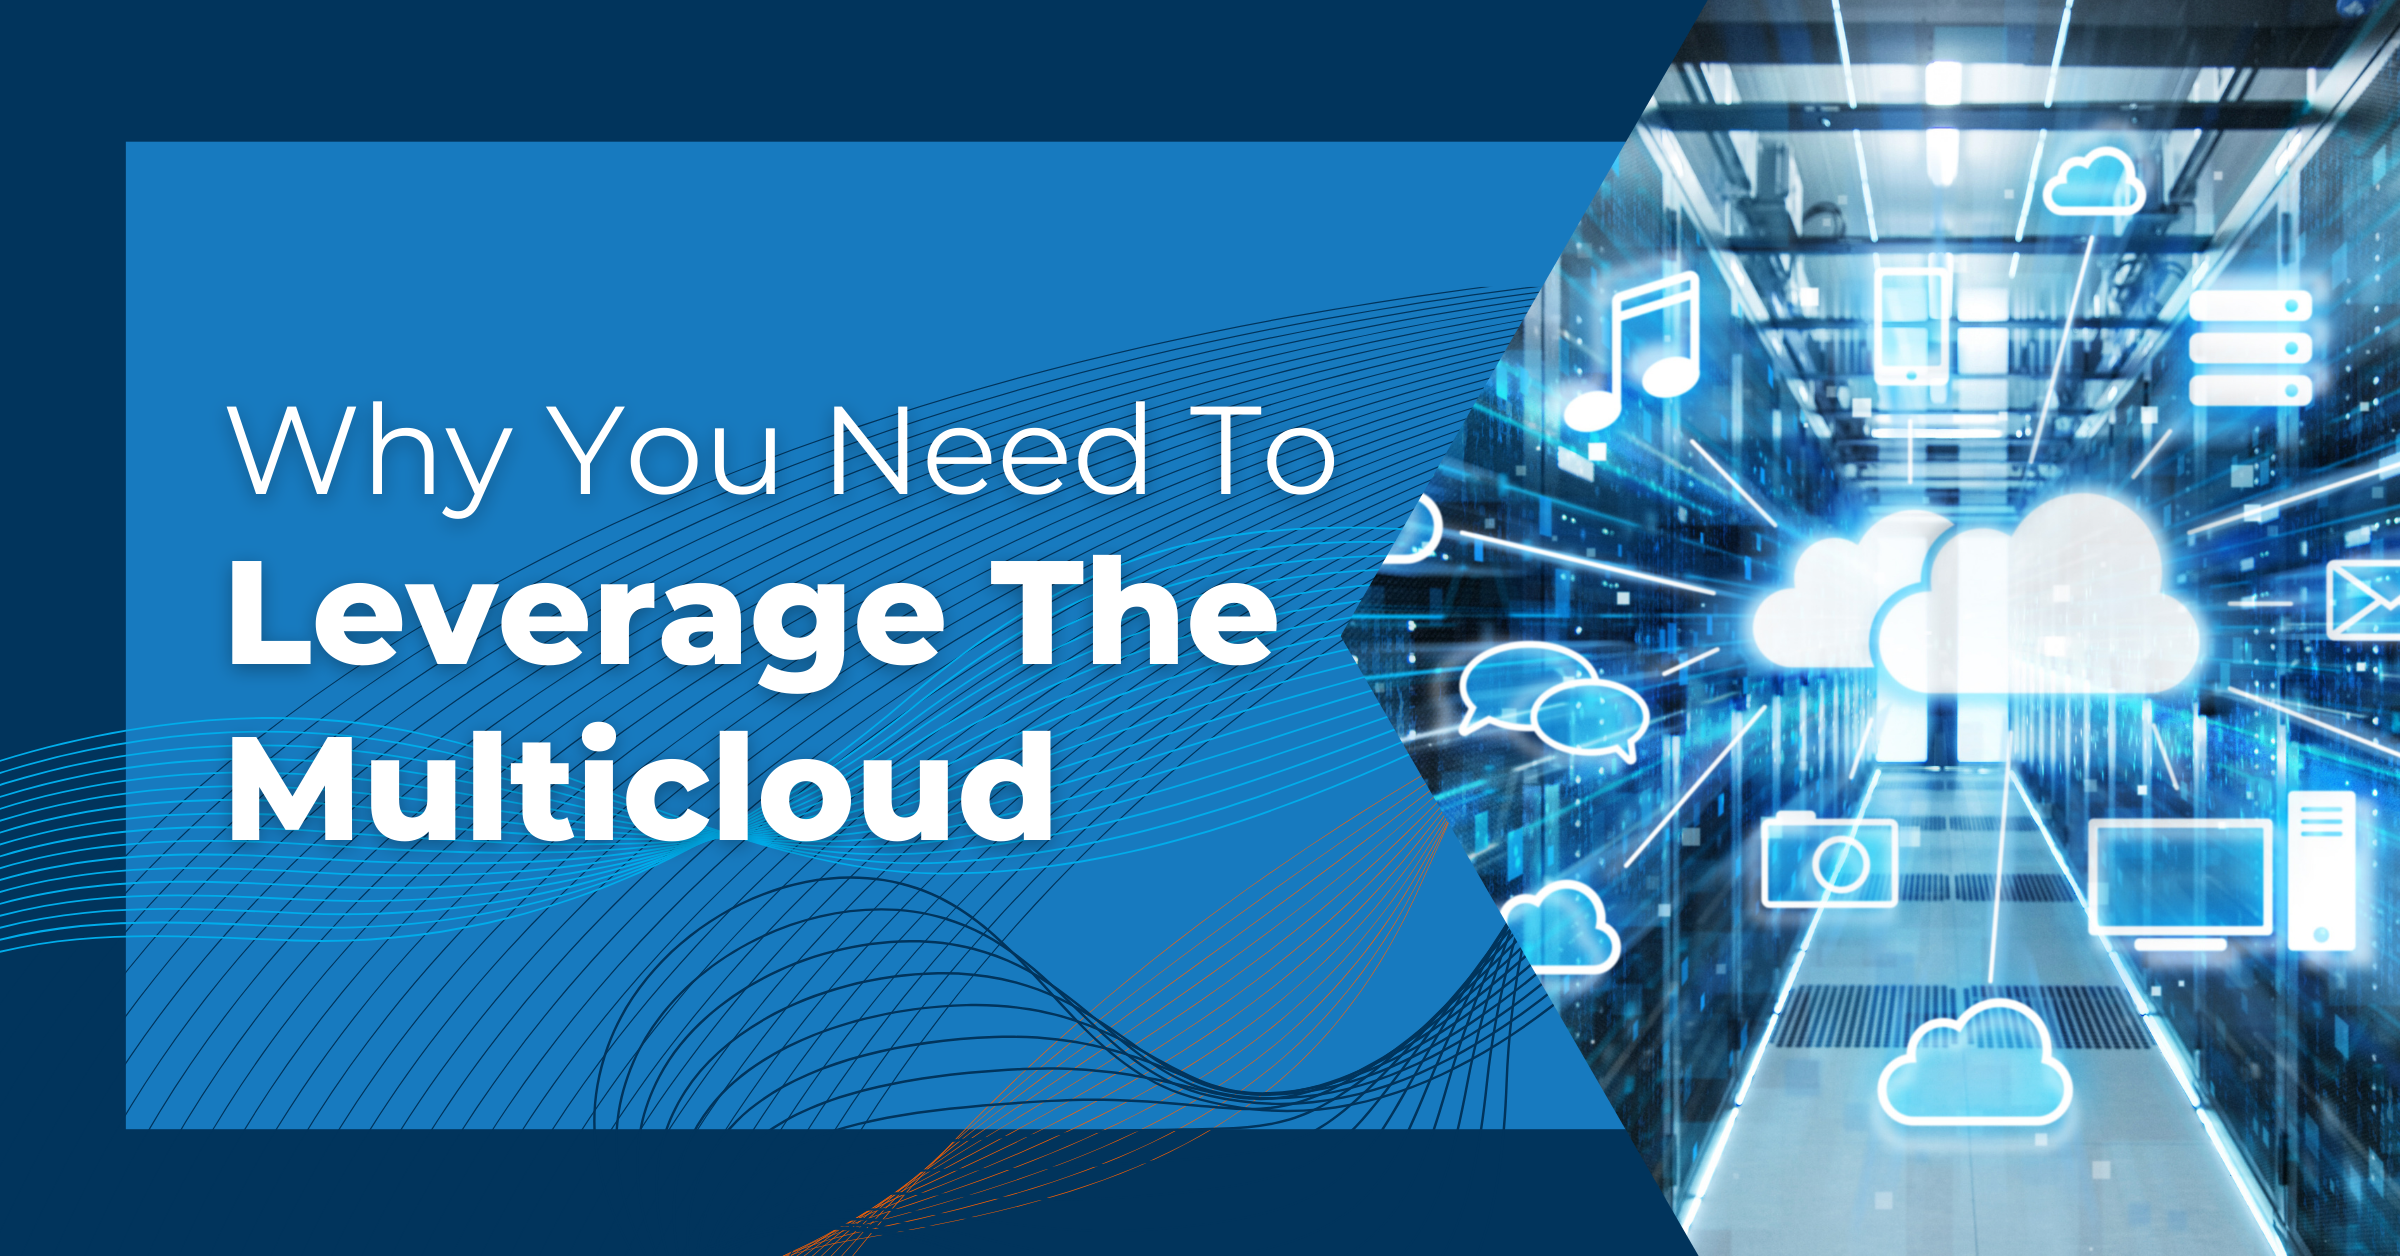 Why you need to leverage the multicloud